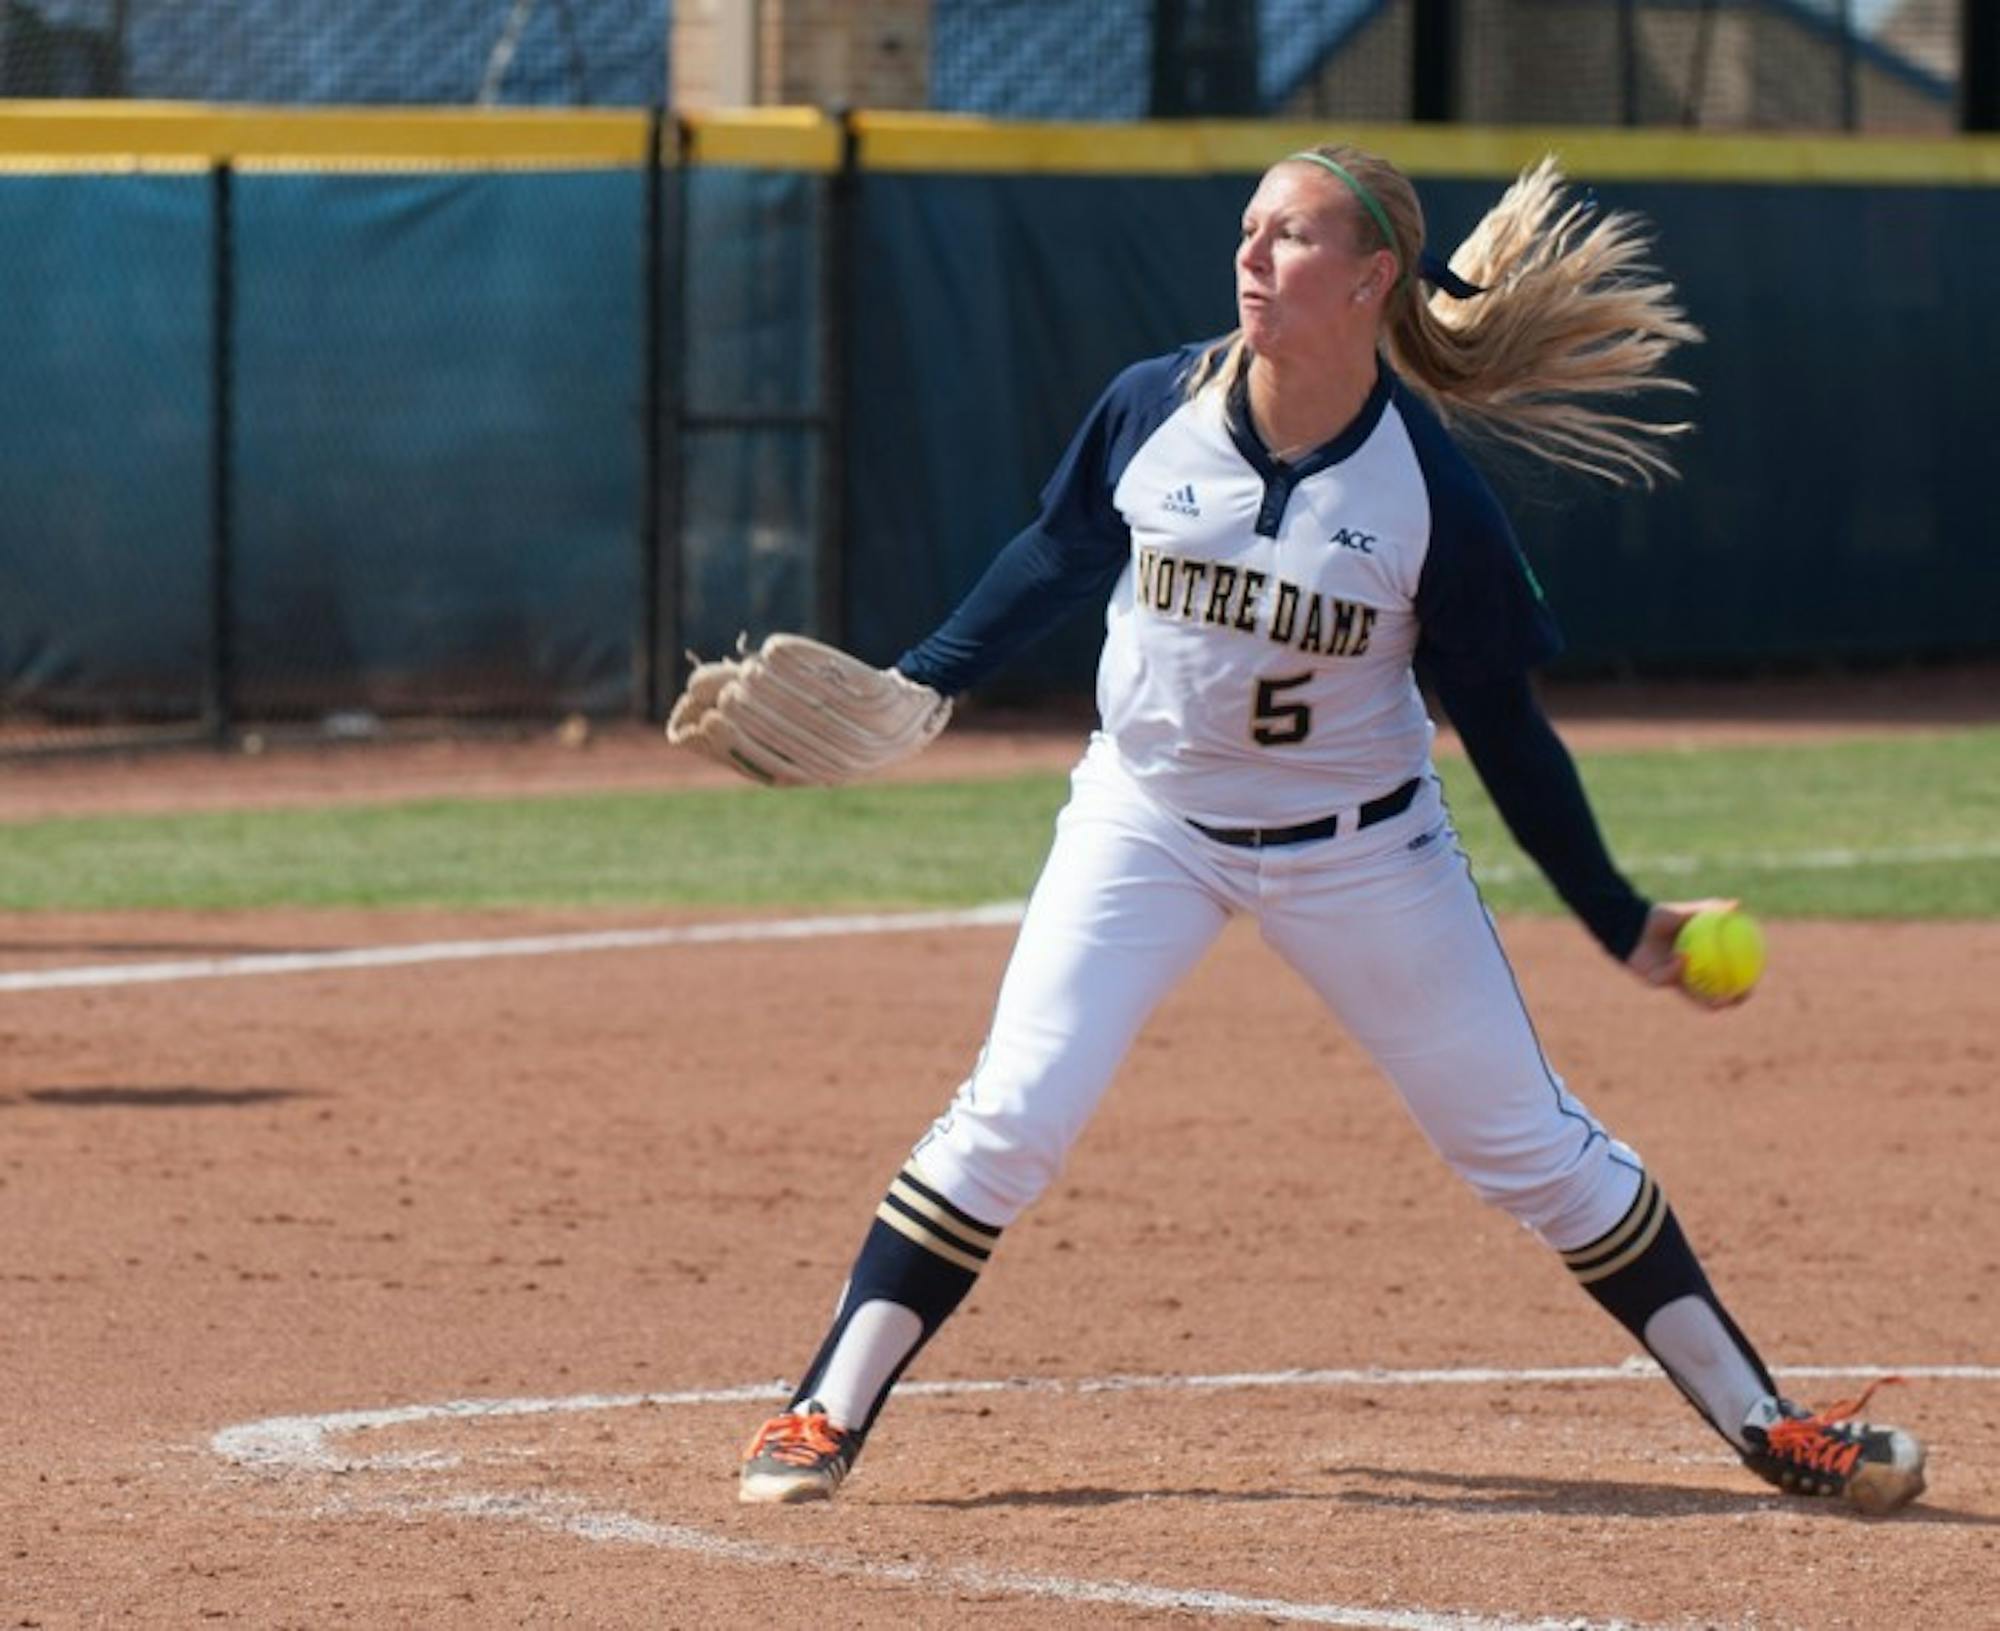 Irish sophomore pitcher Allie Rhodes hurls a pitch in a 12-4 win over Boston College on May 3 at Melissa Cook Stadium.